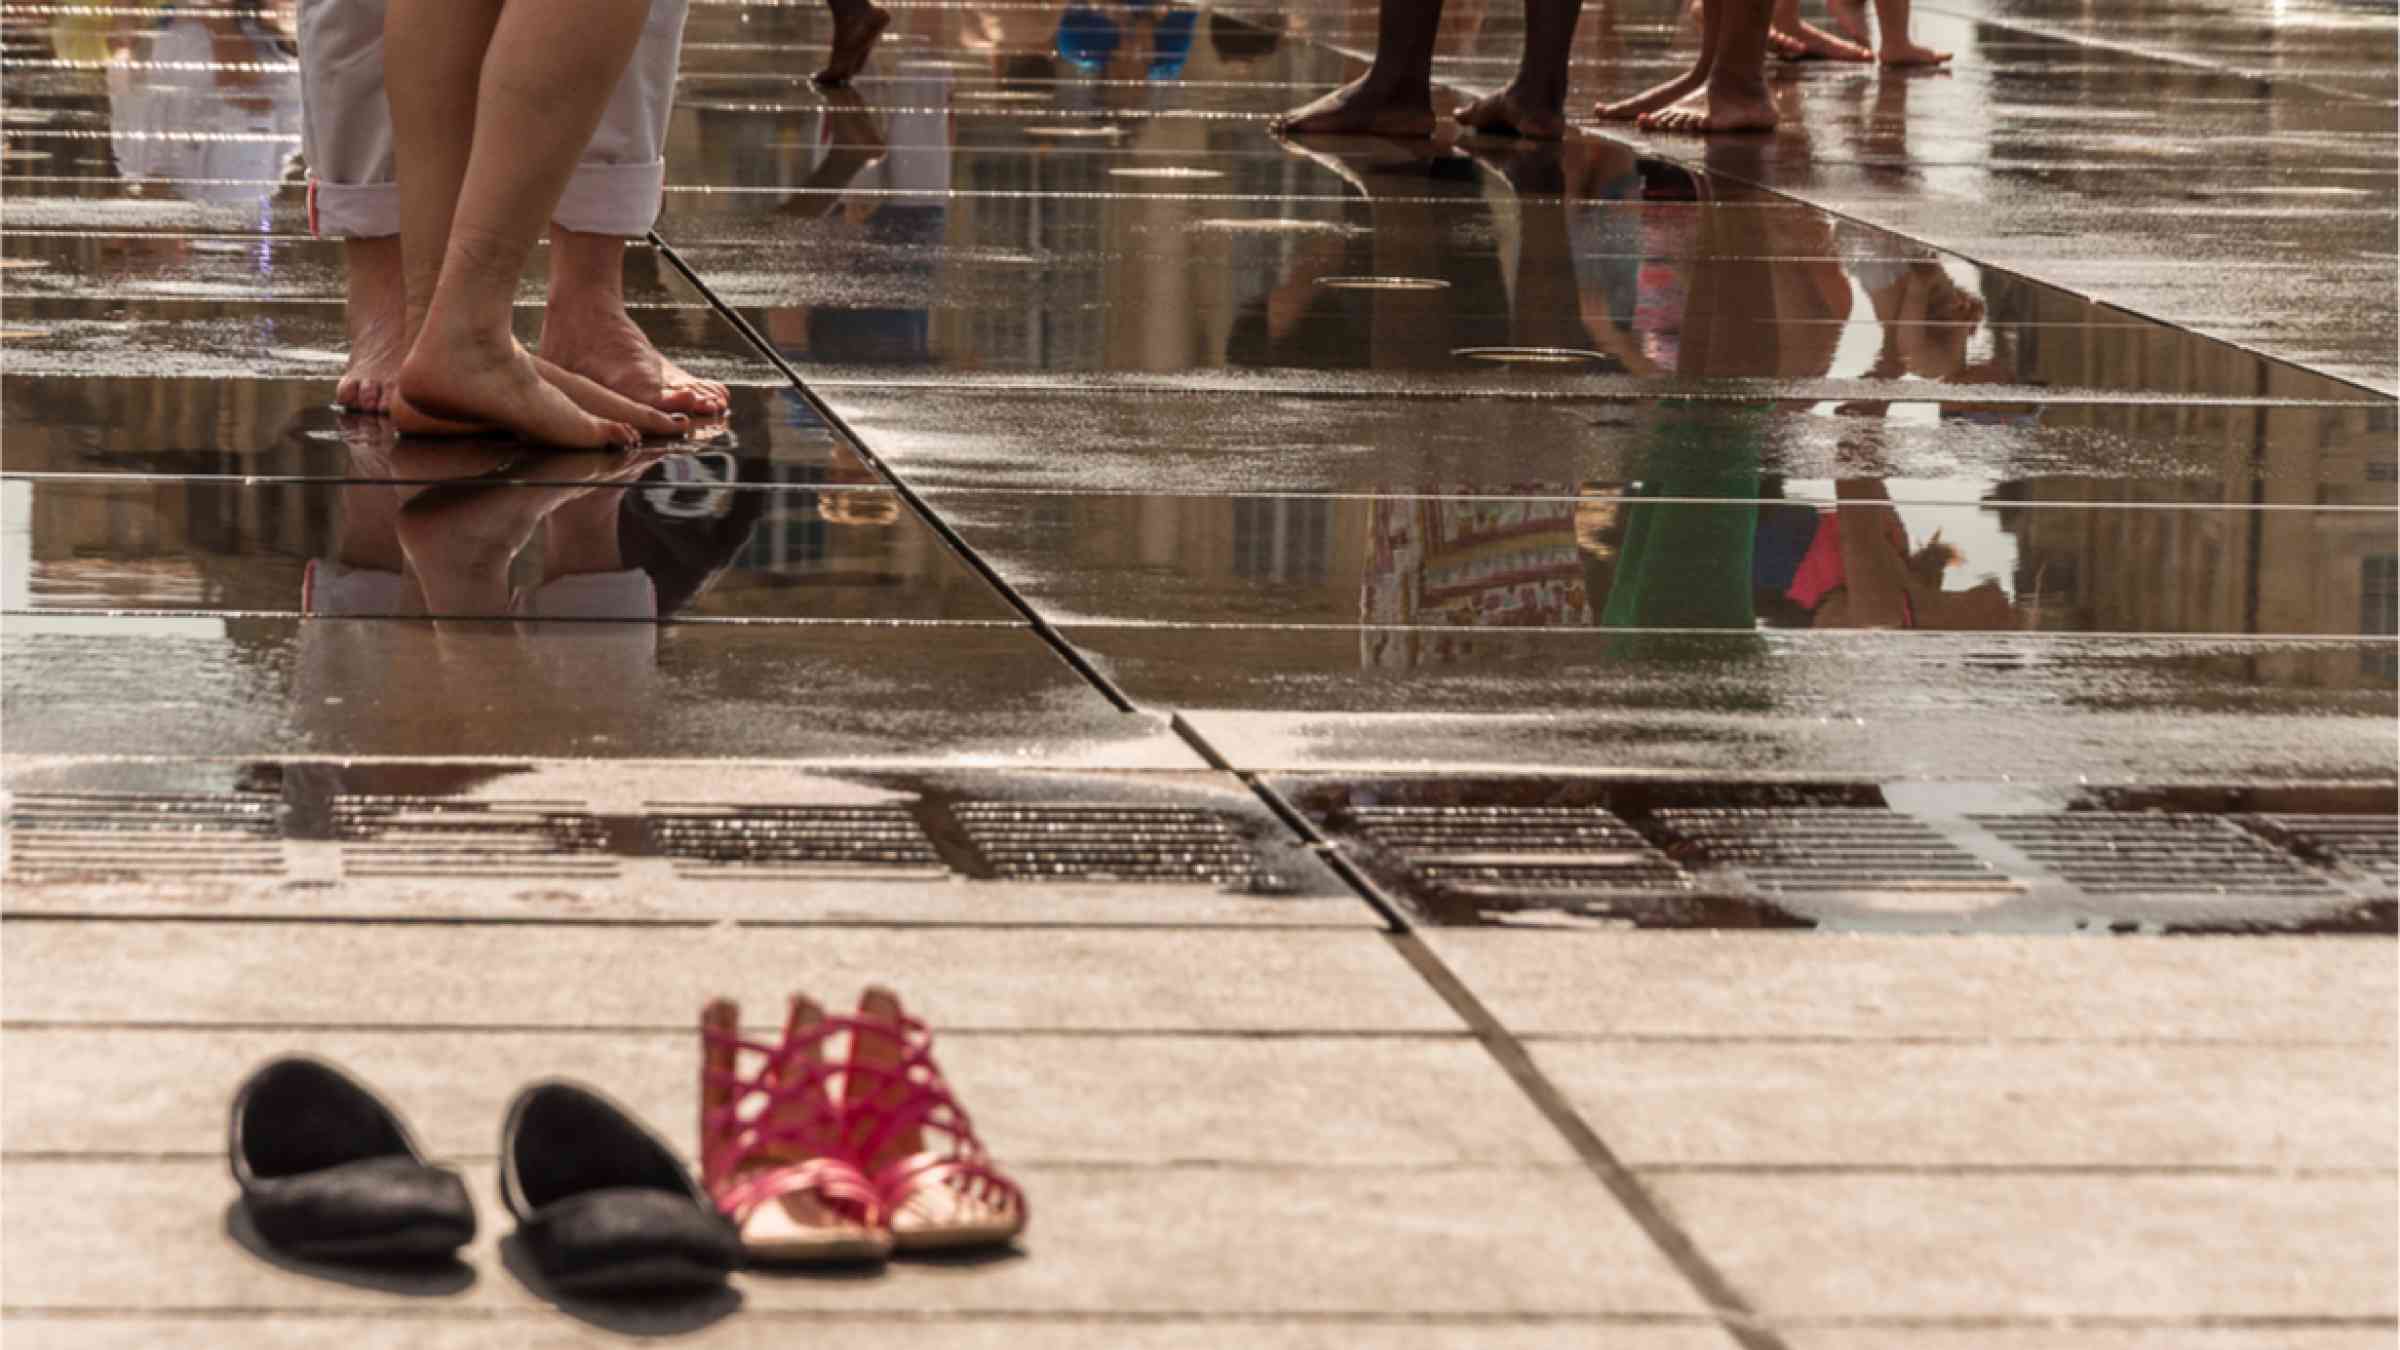 People cooling their feet in water in the city.